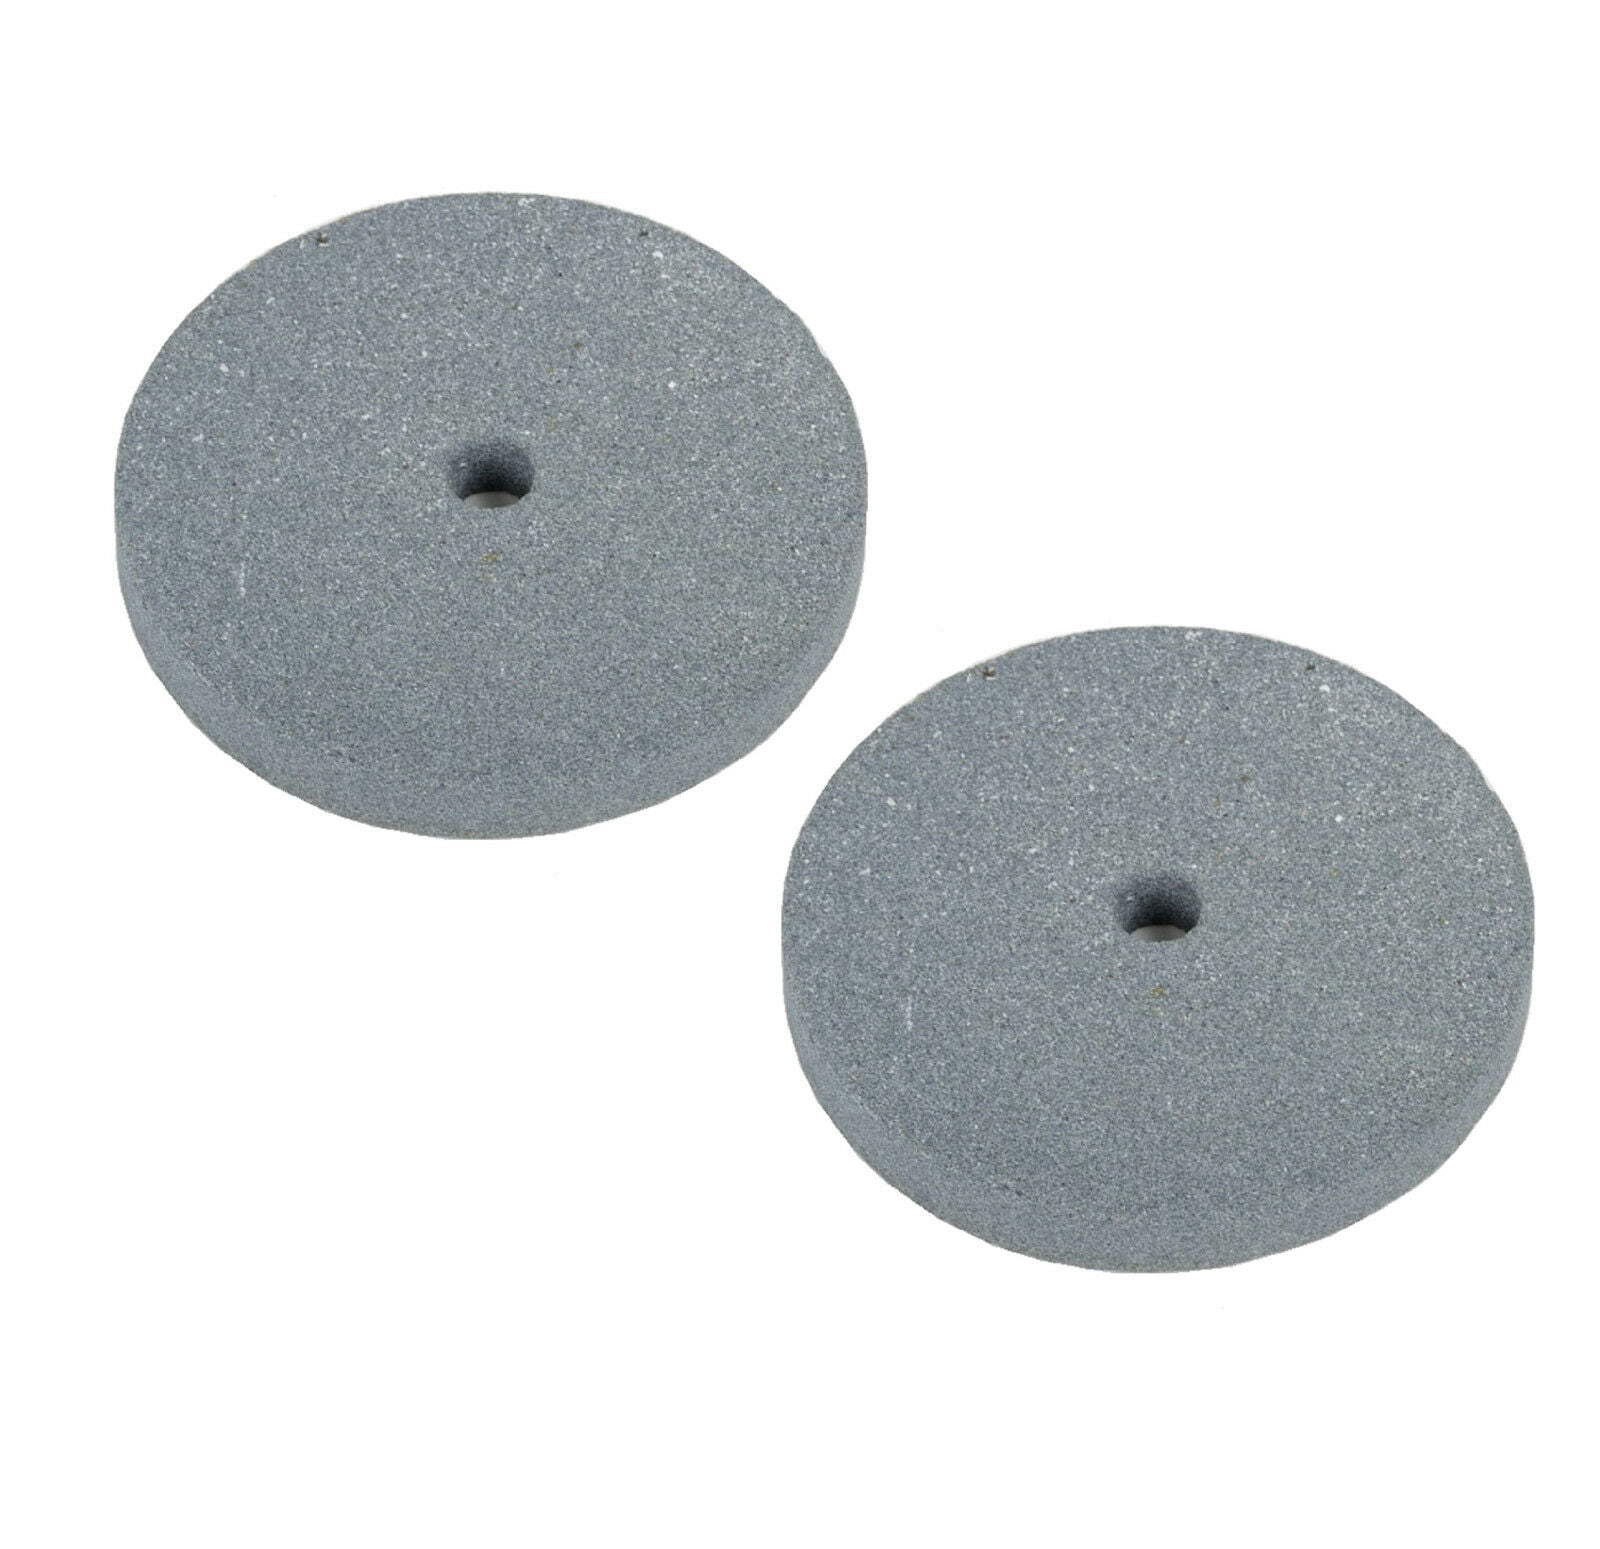 2 PC 6" Emory Style Grinding Stone Wheel For Bench Grinders Fine 3/4" Thick 